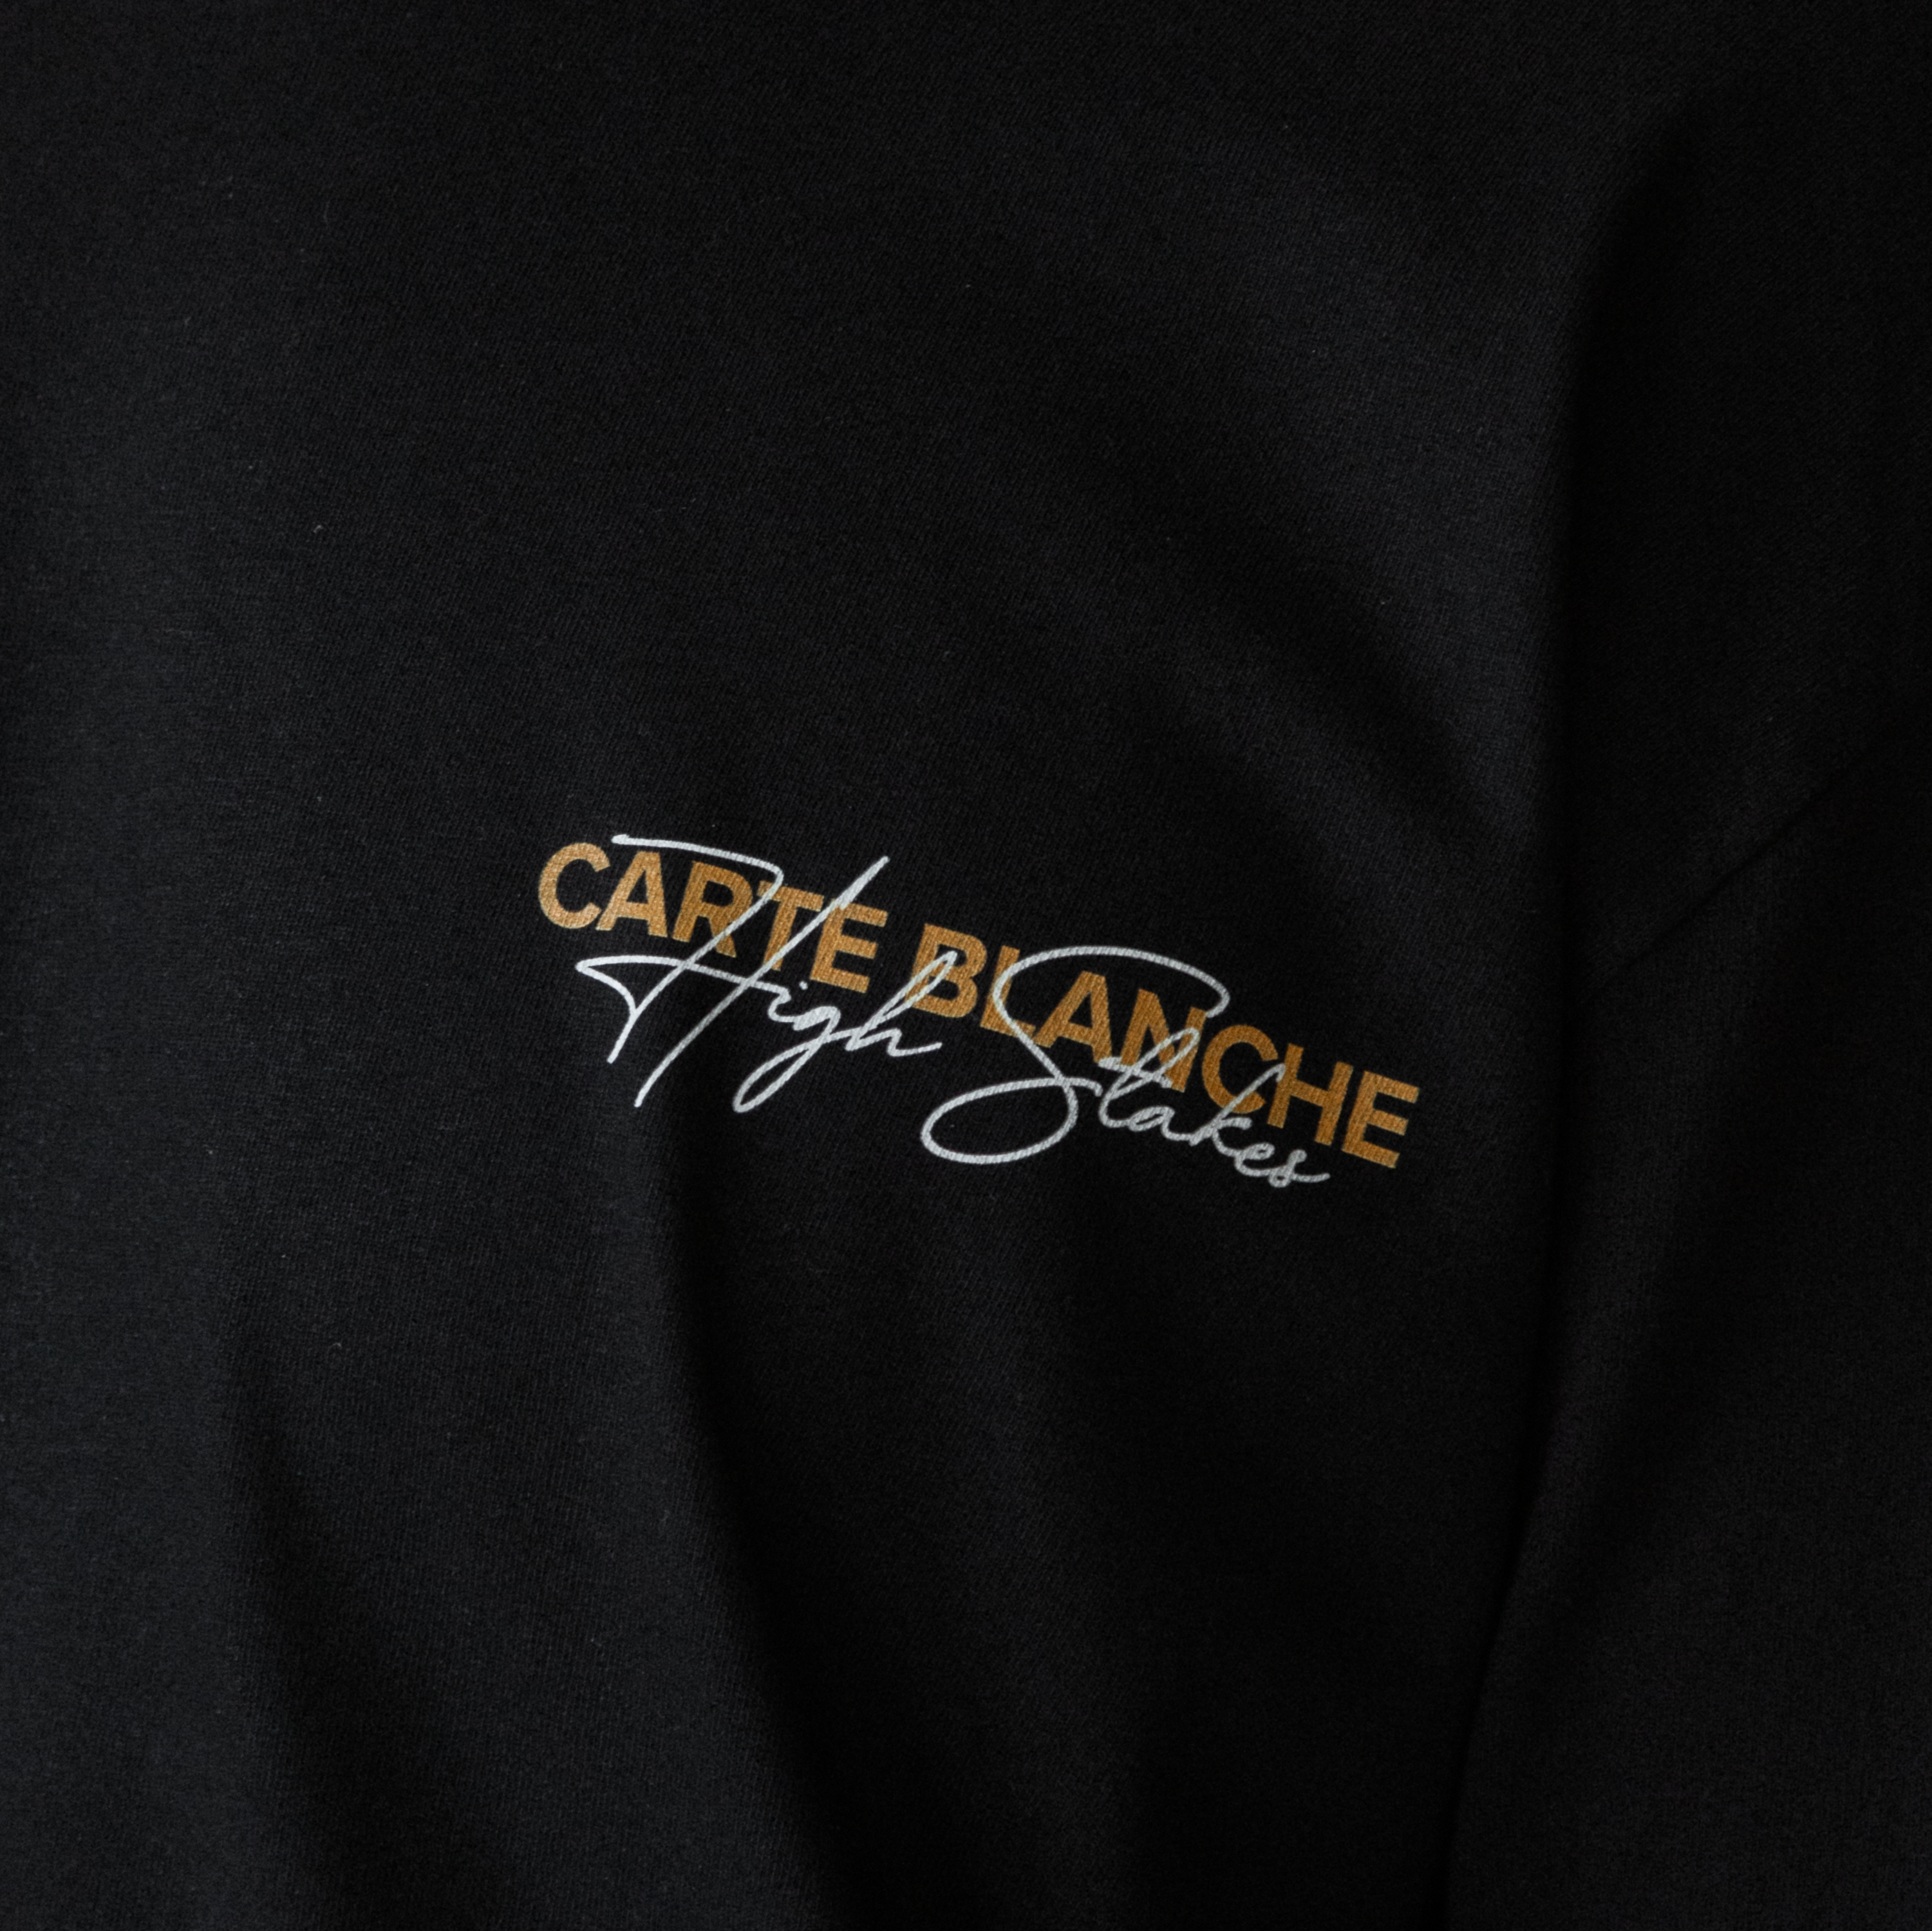 The High Stakes Signature Tee // Black